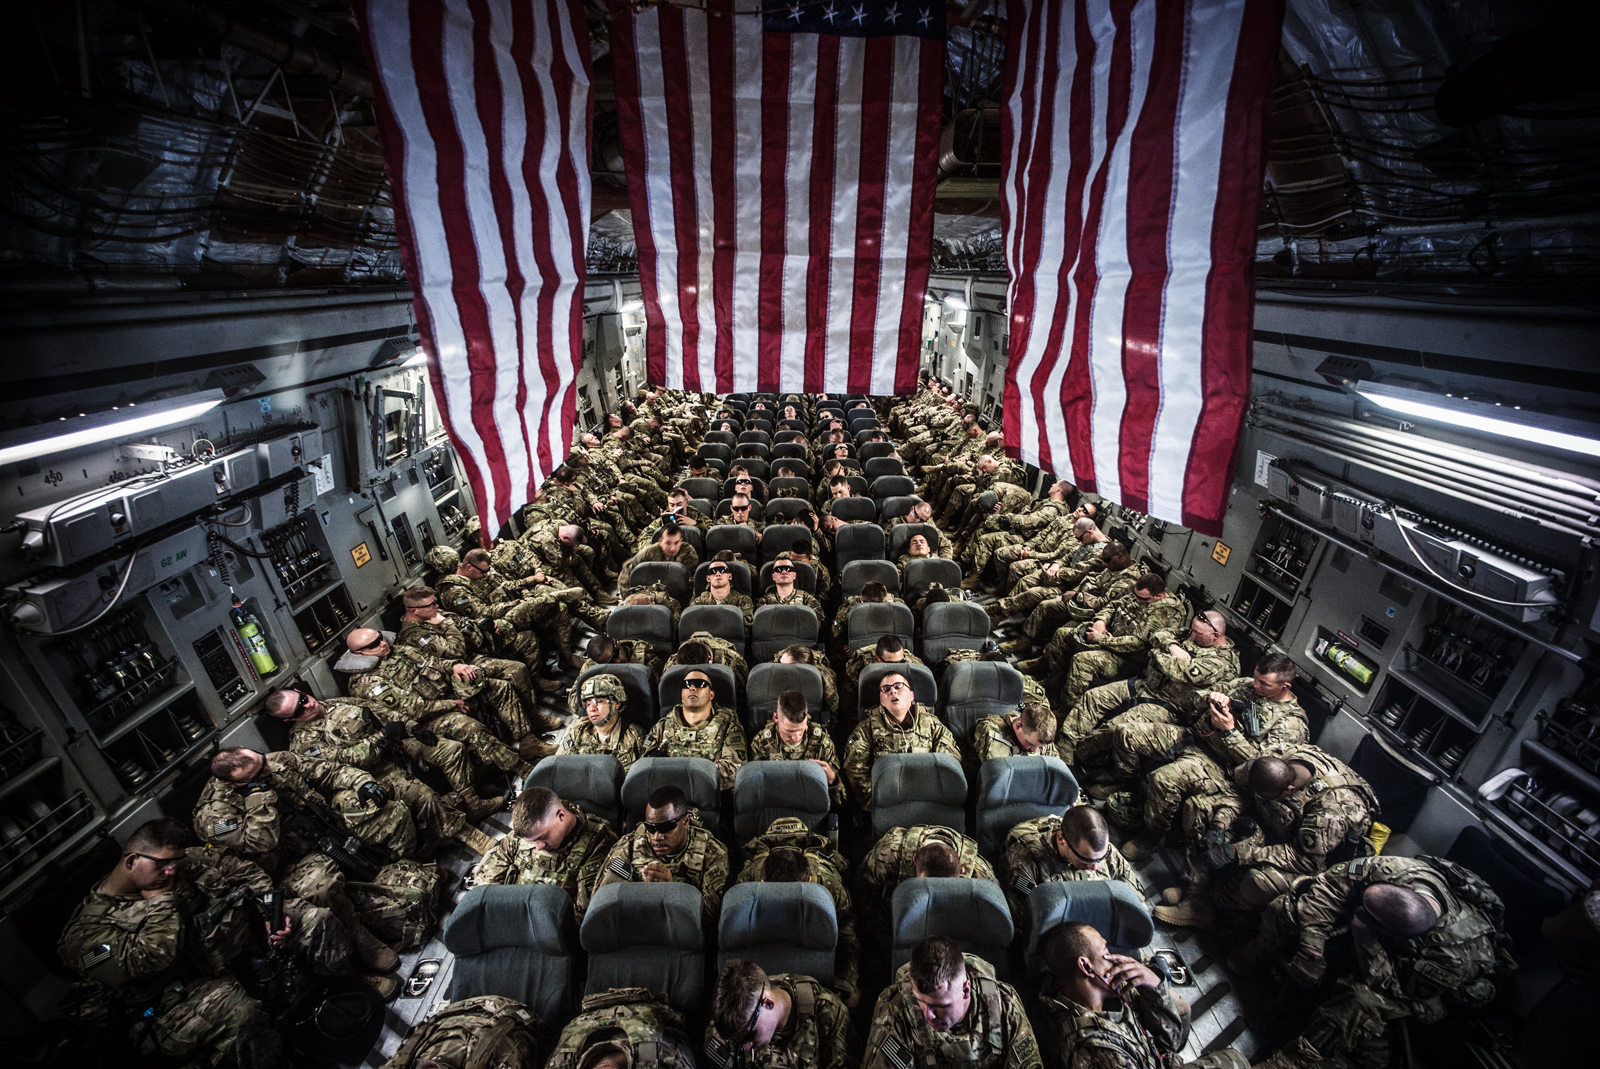 © Ryan Spencer Reed, Soldiers of the 1-506th Infantry Regiment, 4th Brigade Combat Team, 101st Airborne Division, (the battalion known as the Band of Brothers) are enroute on a C-17 from Transit Center at Manas Kyrgyzstan to Bagram Air Field. Taken: 2013.05.05